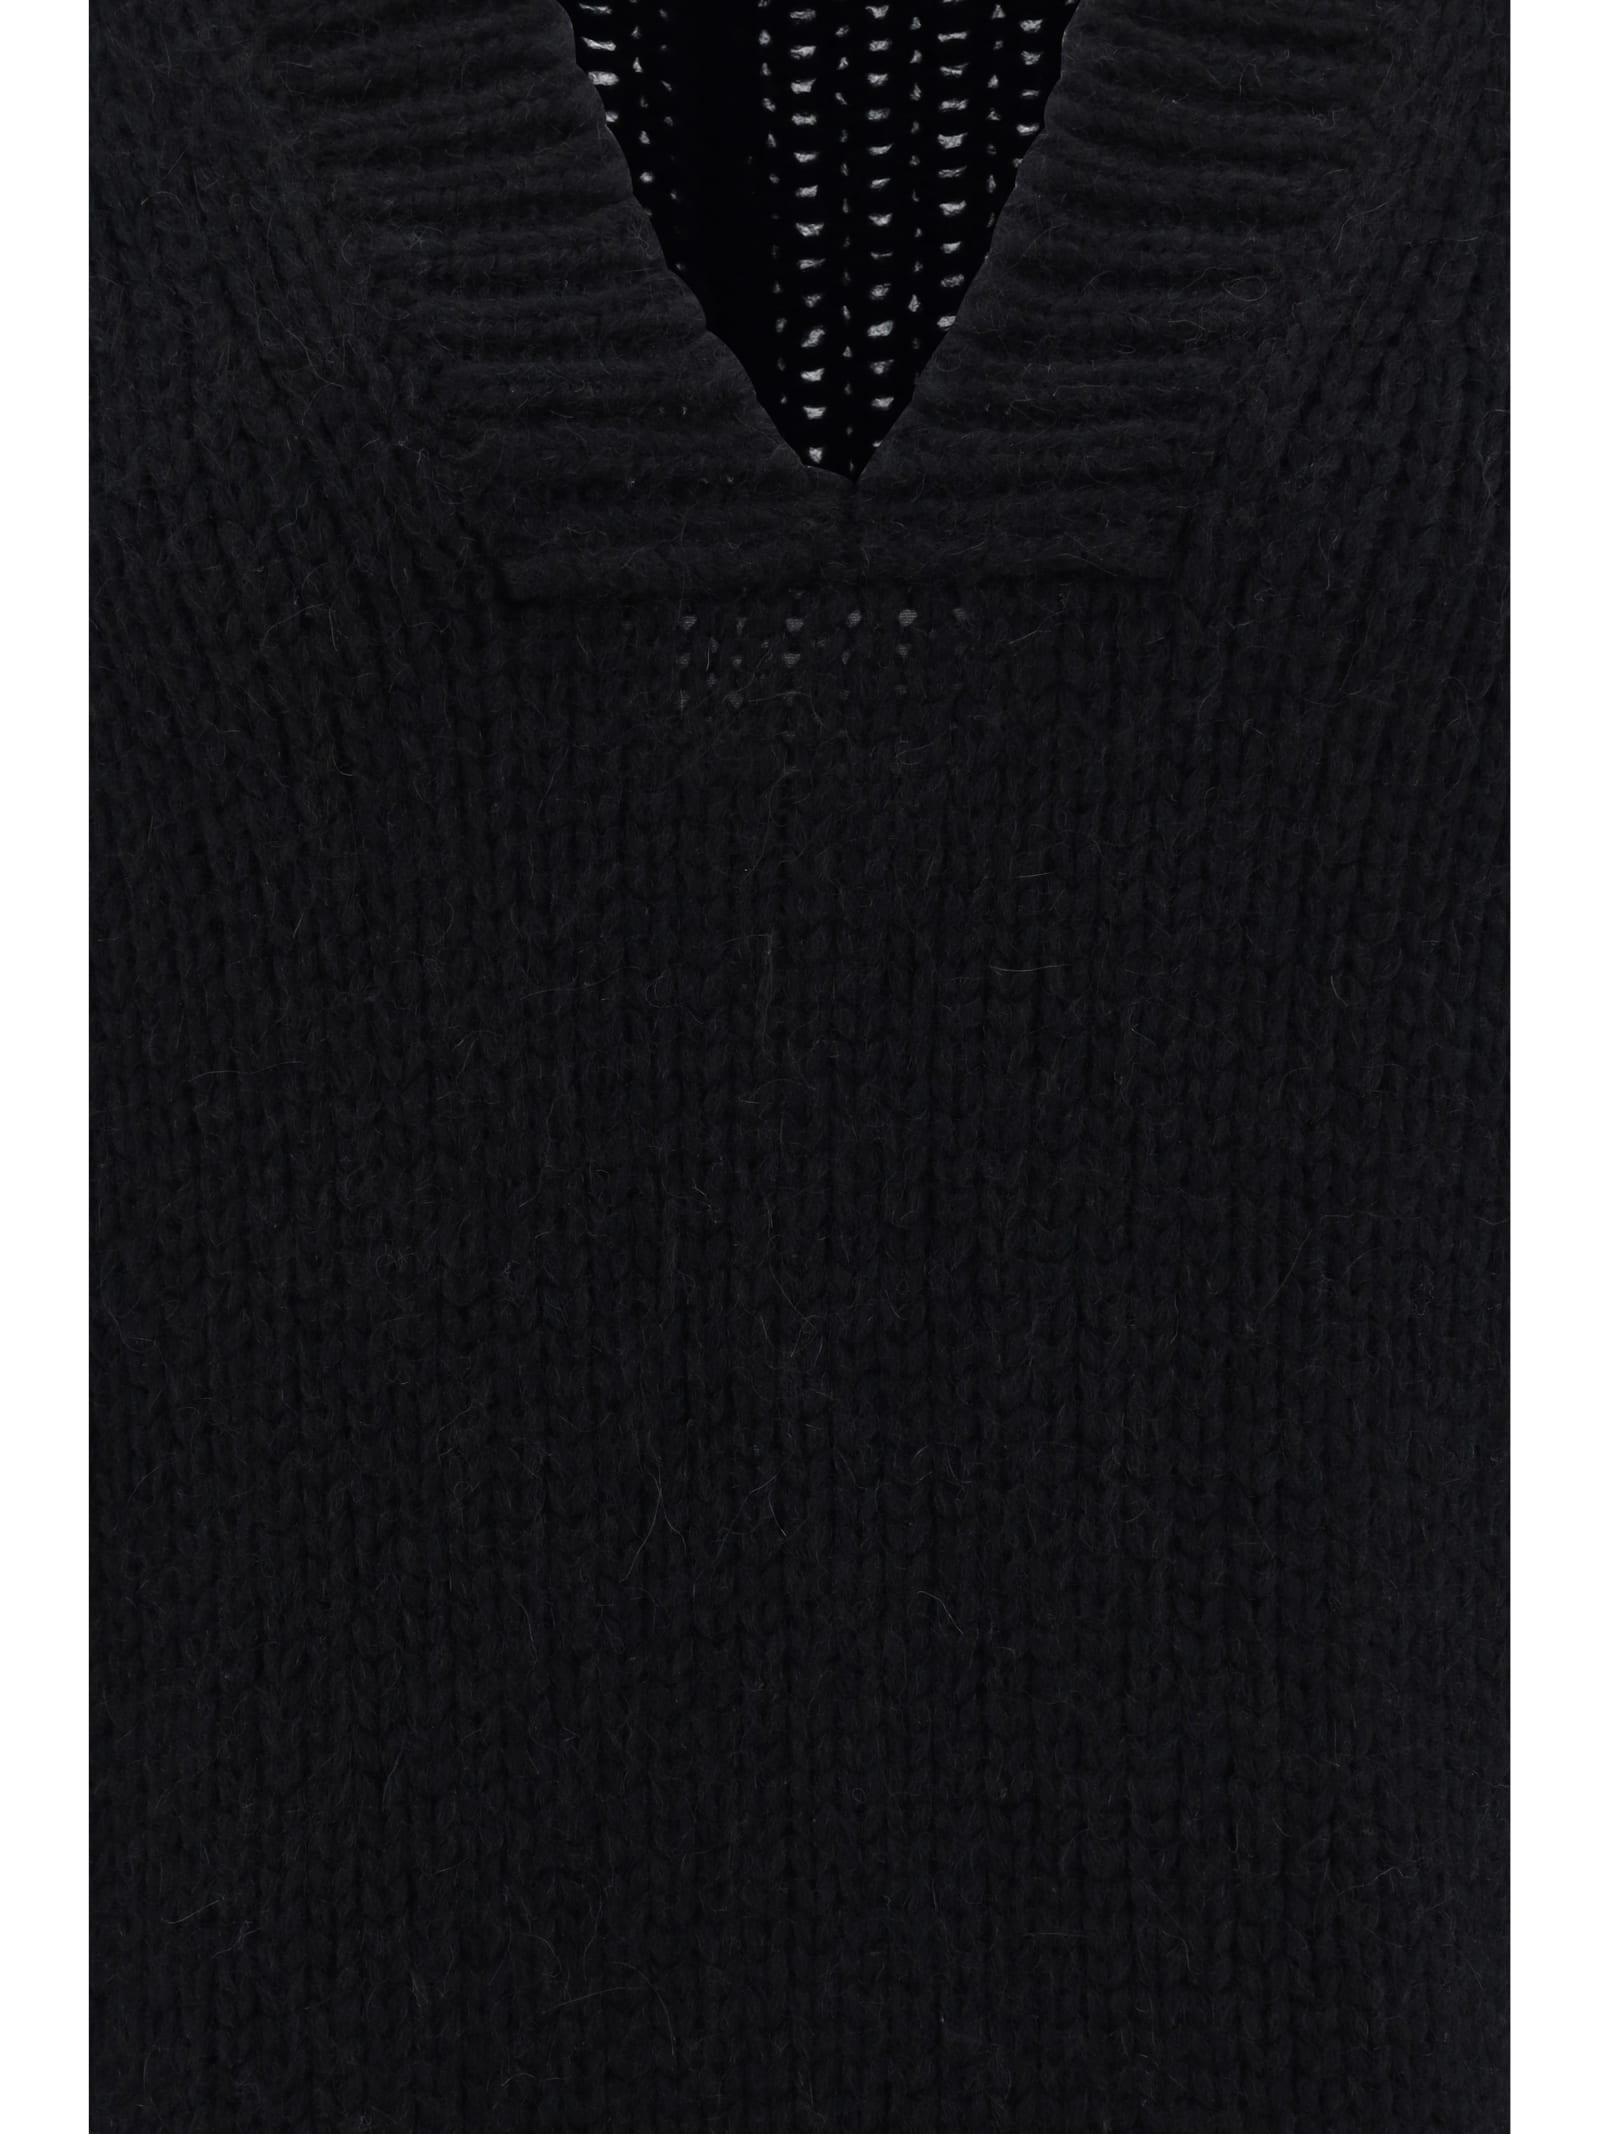 Shop Tom Ford Sweater In Black